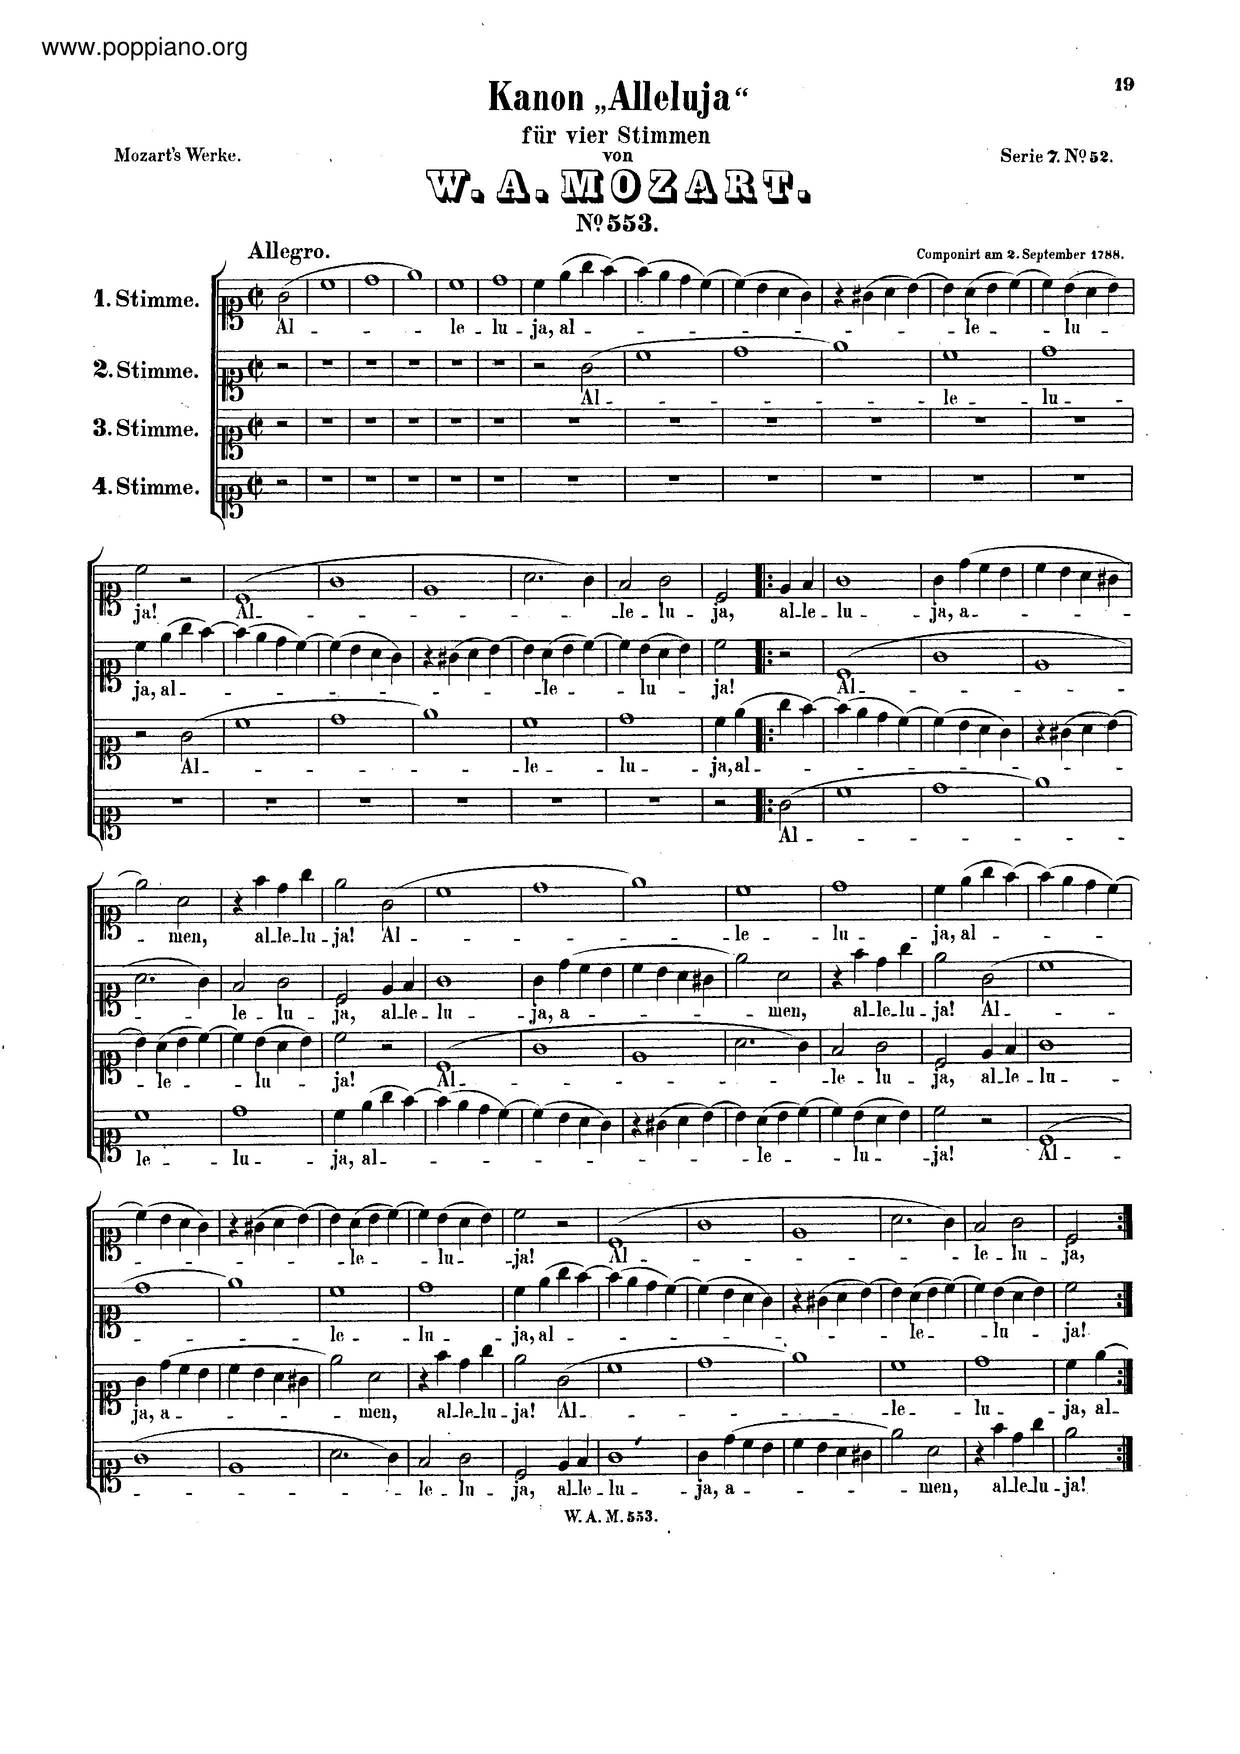 Canon For 4 Voices In C Major, K. 553 Score